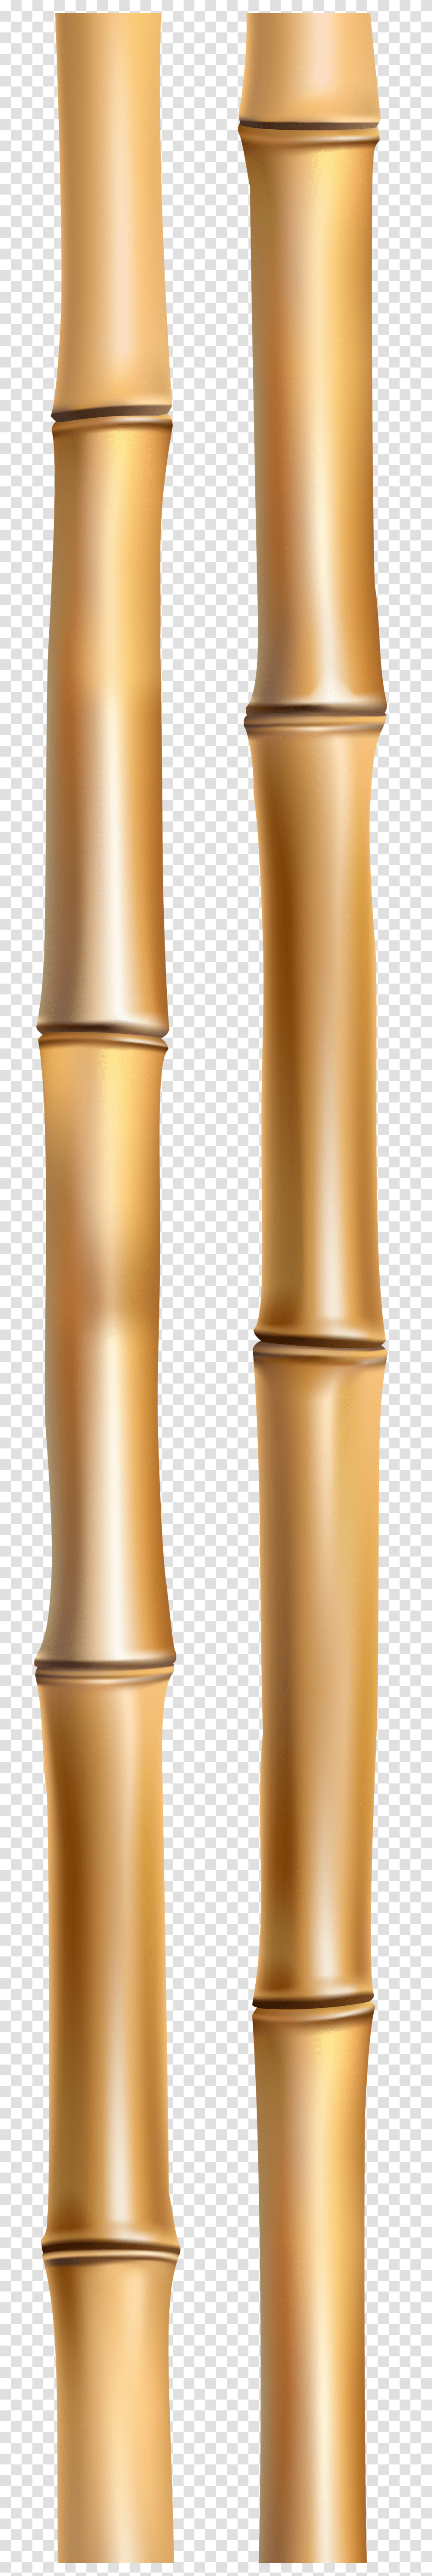 Bamboo, Nature, Plant, Scroll, Pen Transparent Png